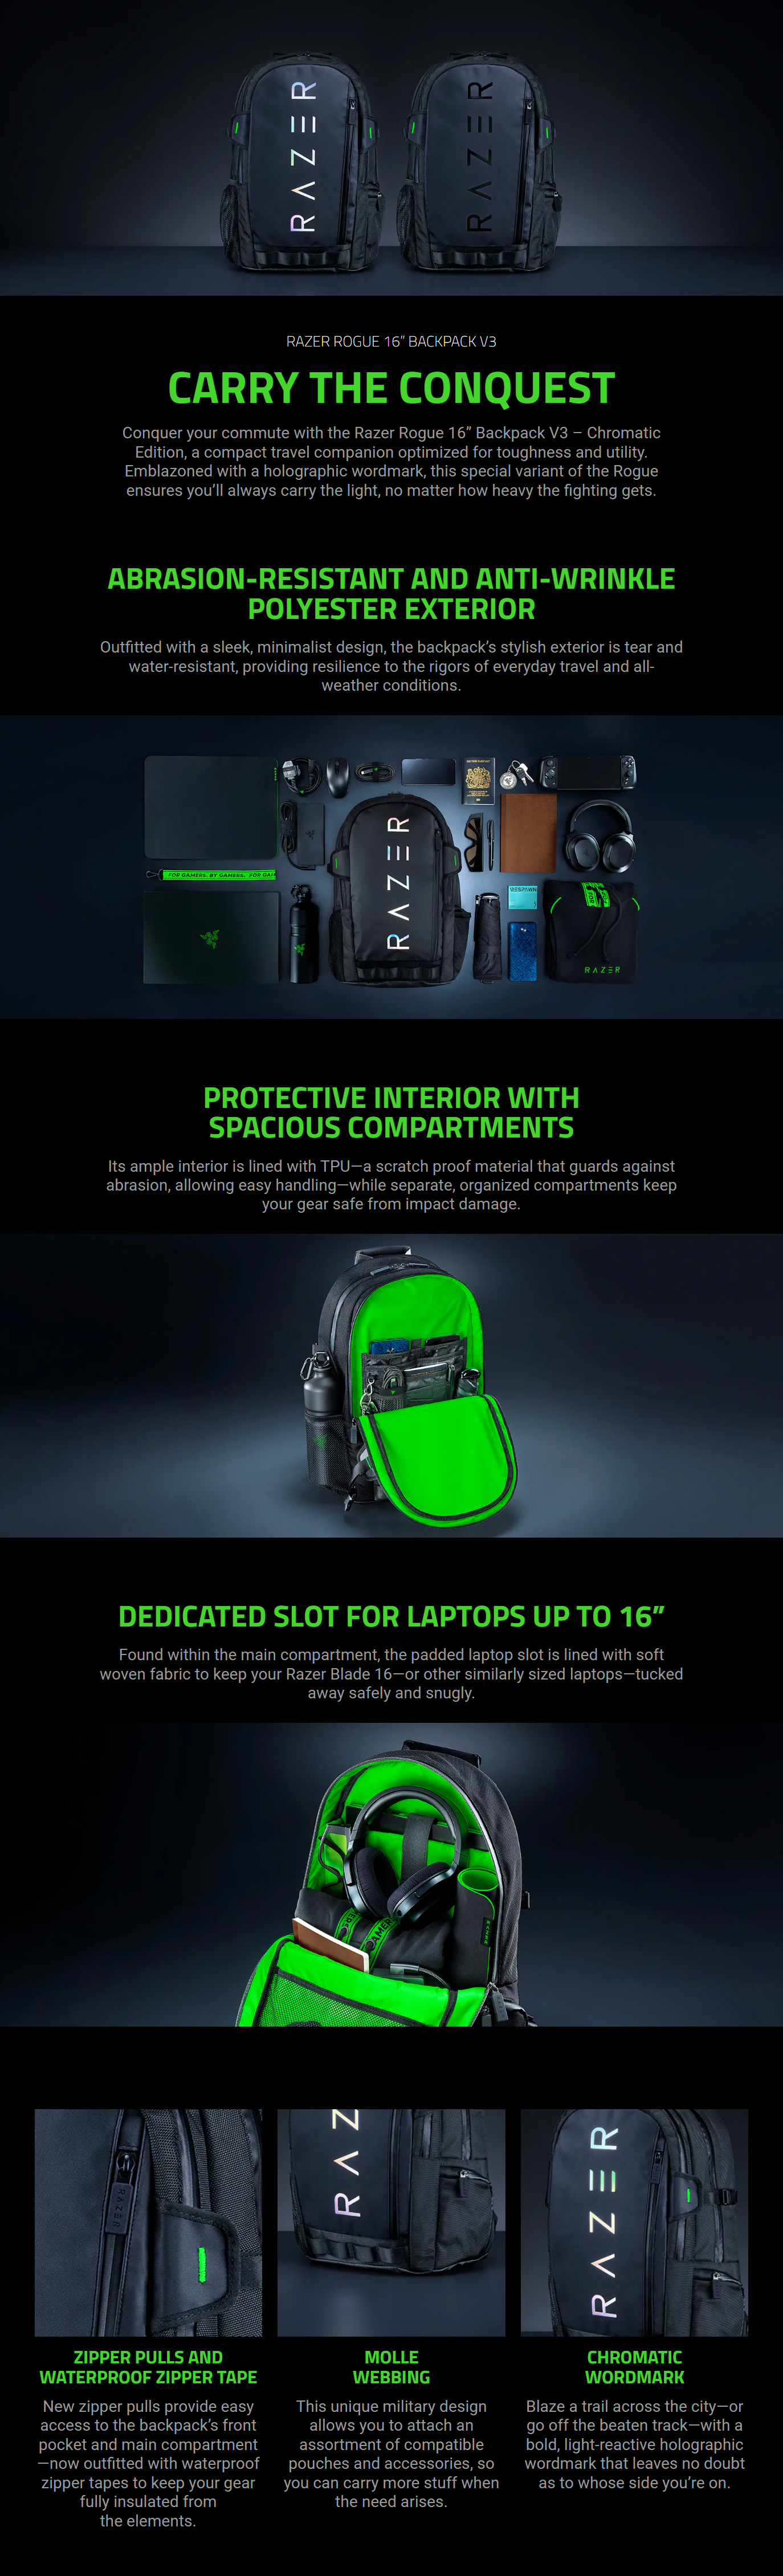 Laptop-Carry-Bags-Razer-Rogue-16in-Backpack-V3-Chromatic-Edition-RC81-03640116-0000-1